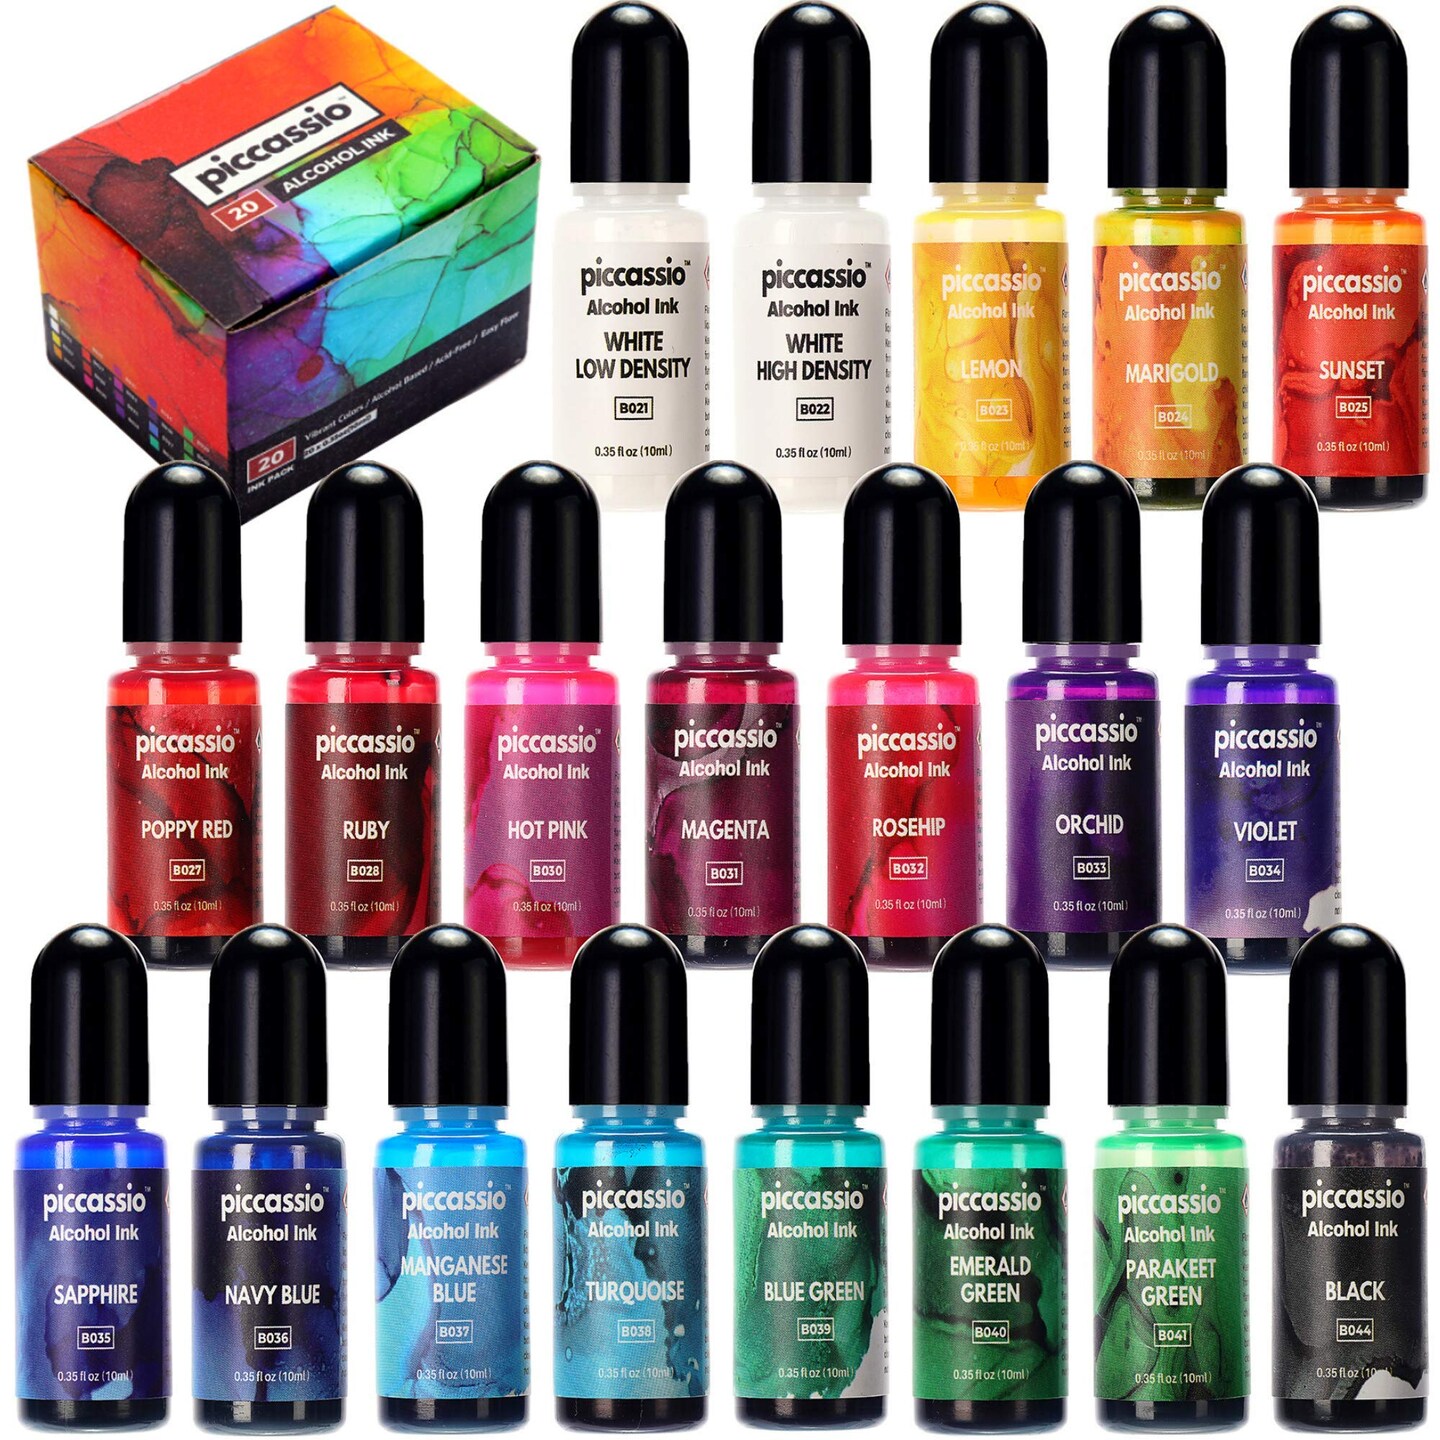 Piccassio Alcohol Ink Set - 20 Vibrant Alcohol Inks - Acid-Free,Fast-Drying and Permanent Inks-Versatile Alcohol Ink for Epoxy Resin, Fluid Art Painting,Tumblers,Ceramic,Glass,Metal and more - 20x10ml